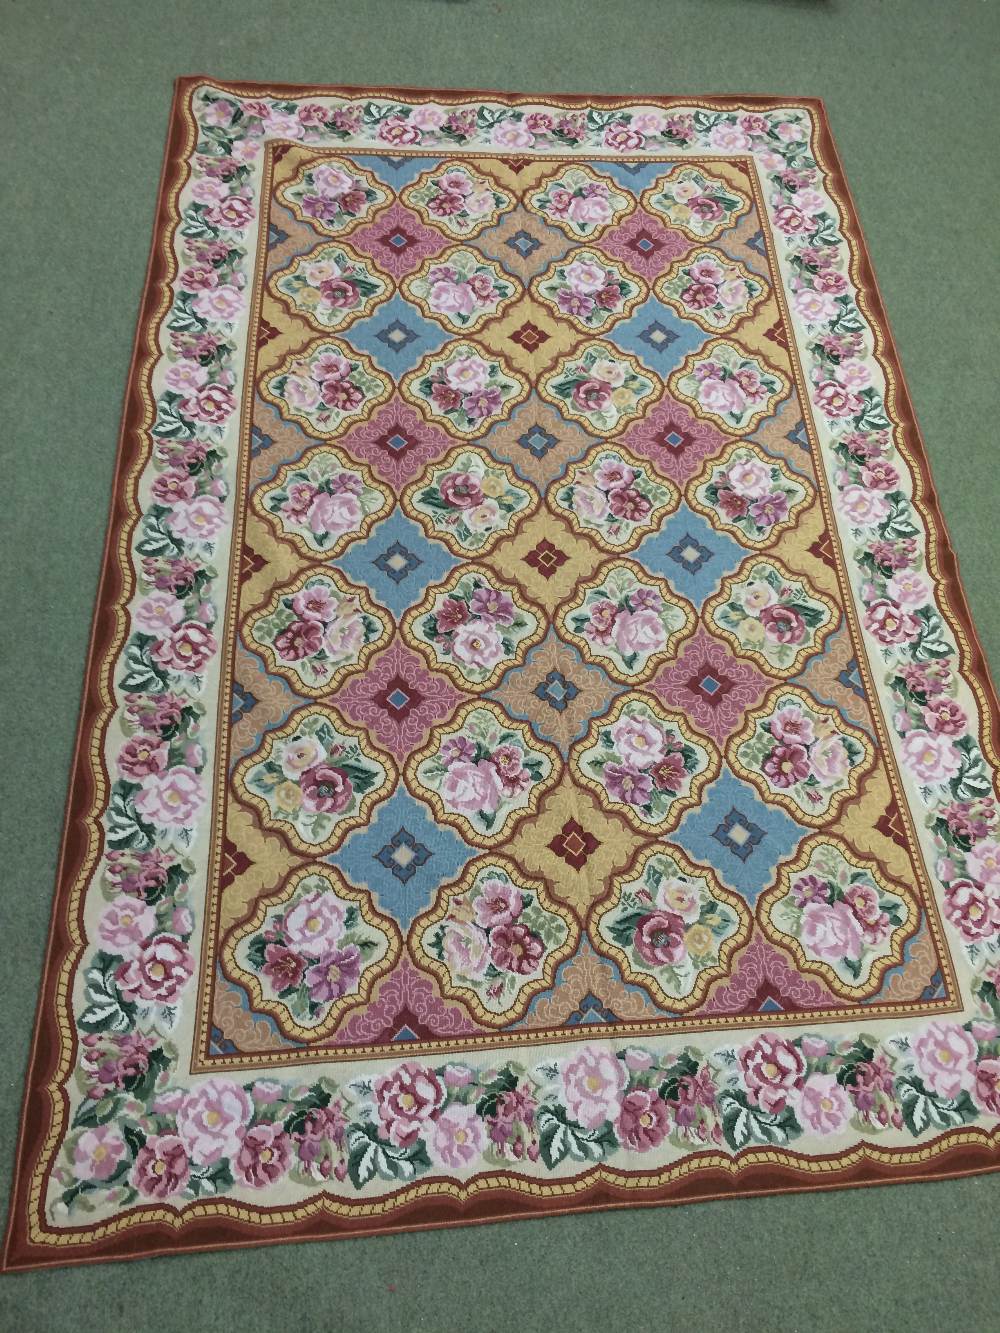 Finely hand woven needlepoint carpet 2.84 X 1.84m - Image 2 of 3